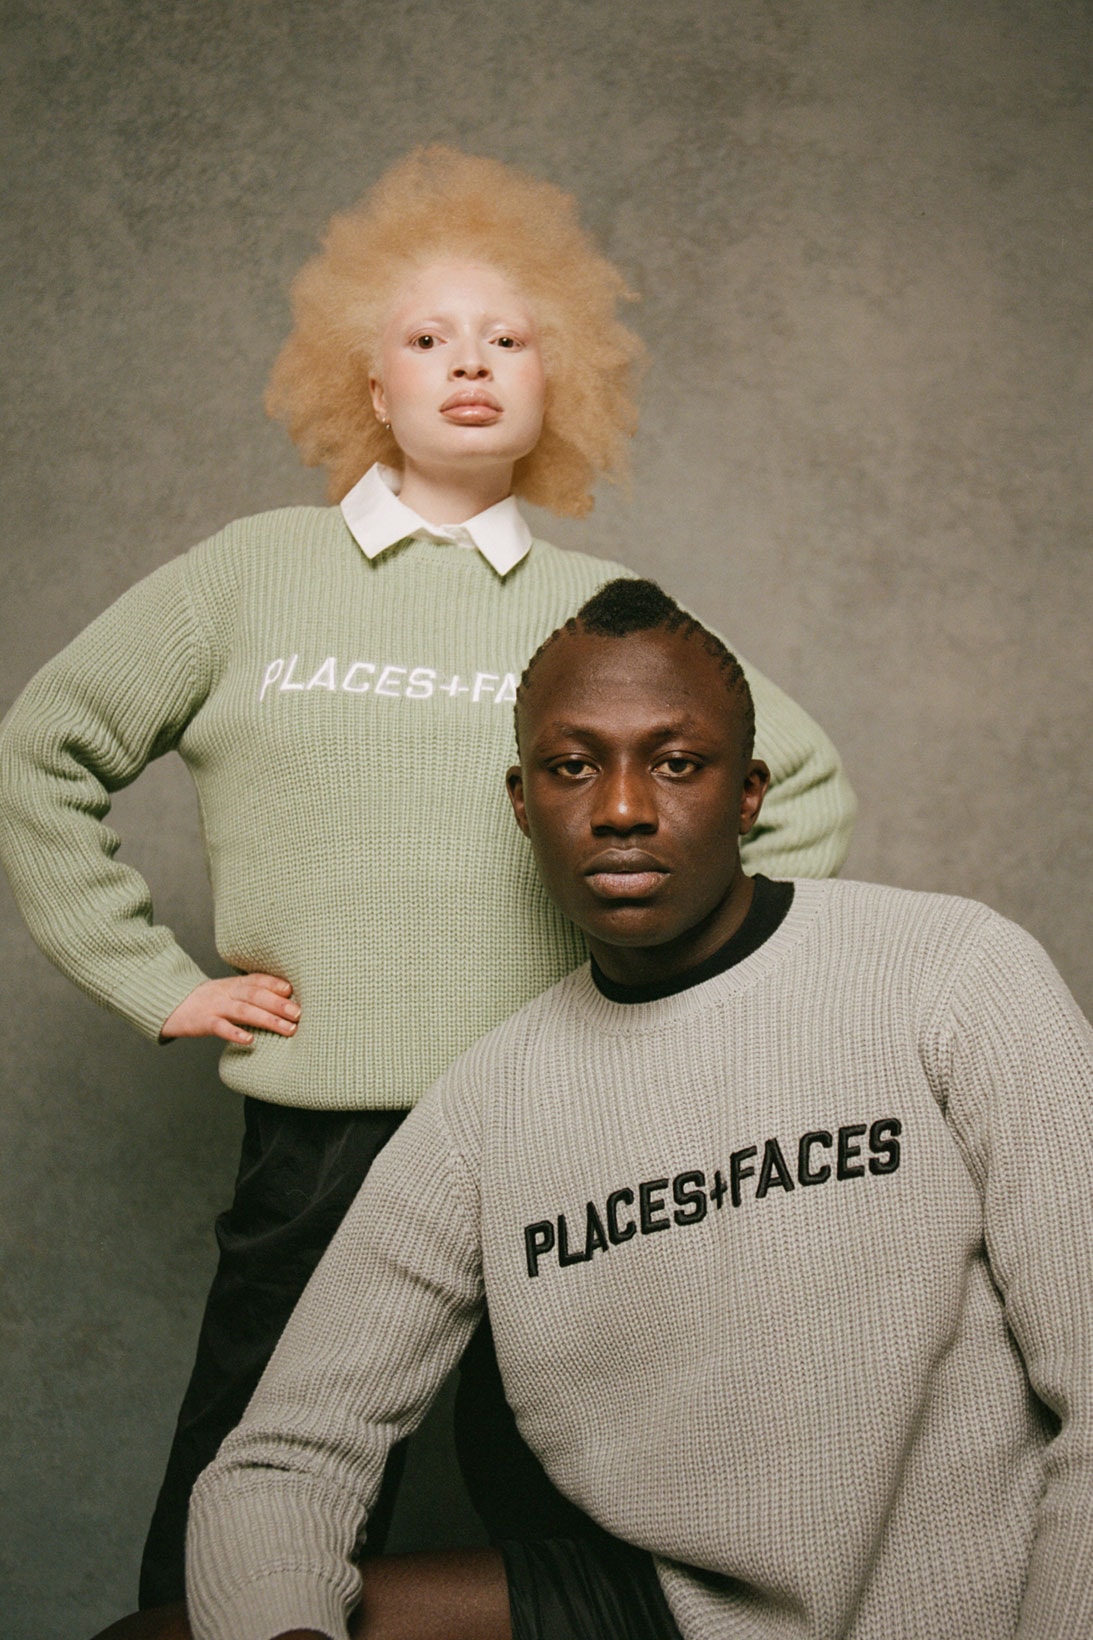 places plus faces 2021 first drop knitwear sweater logo mint shirt collar gray